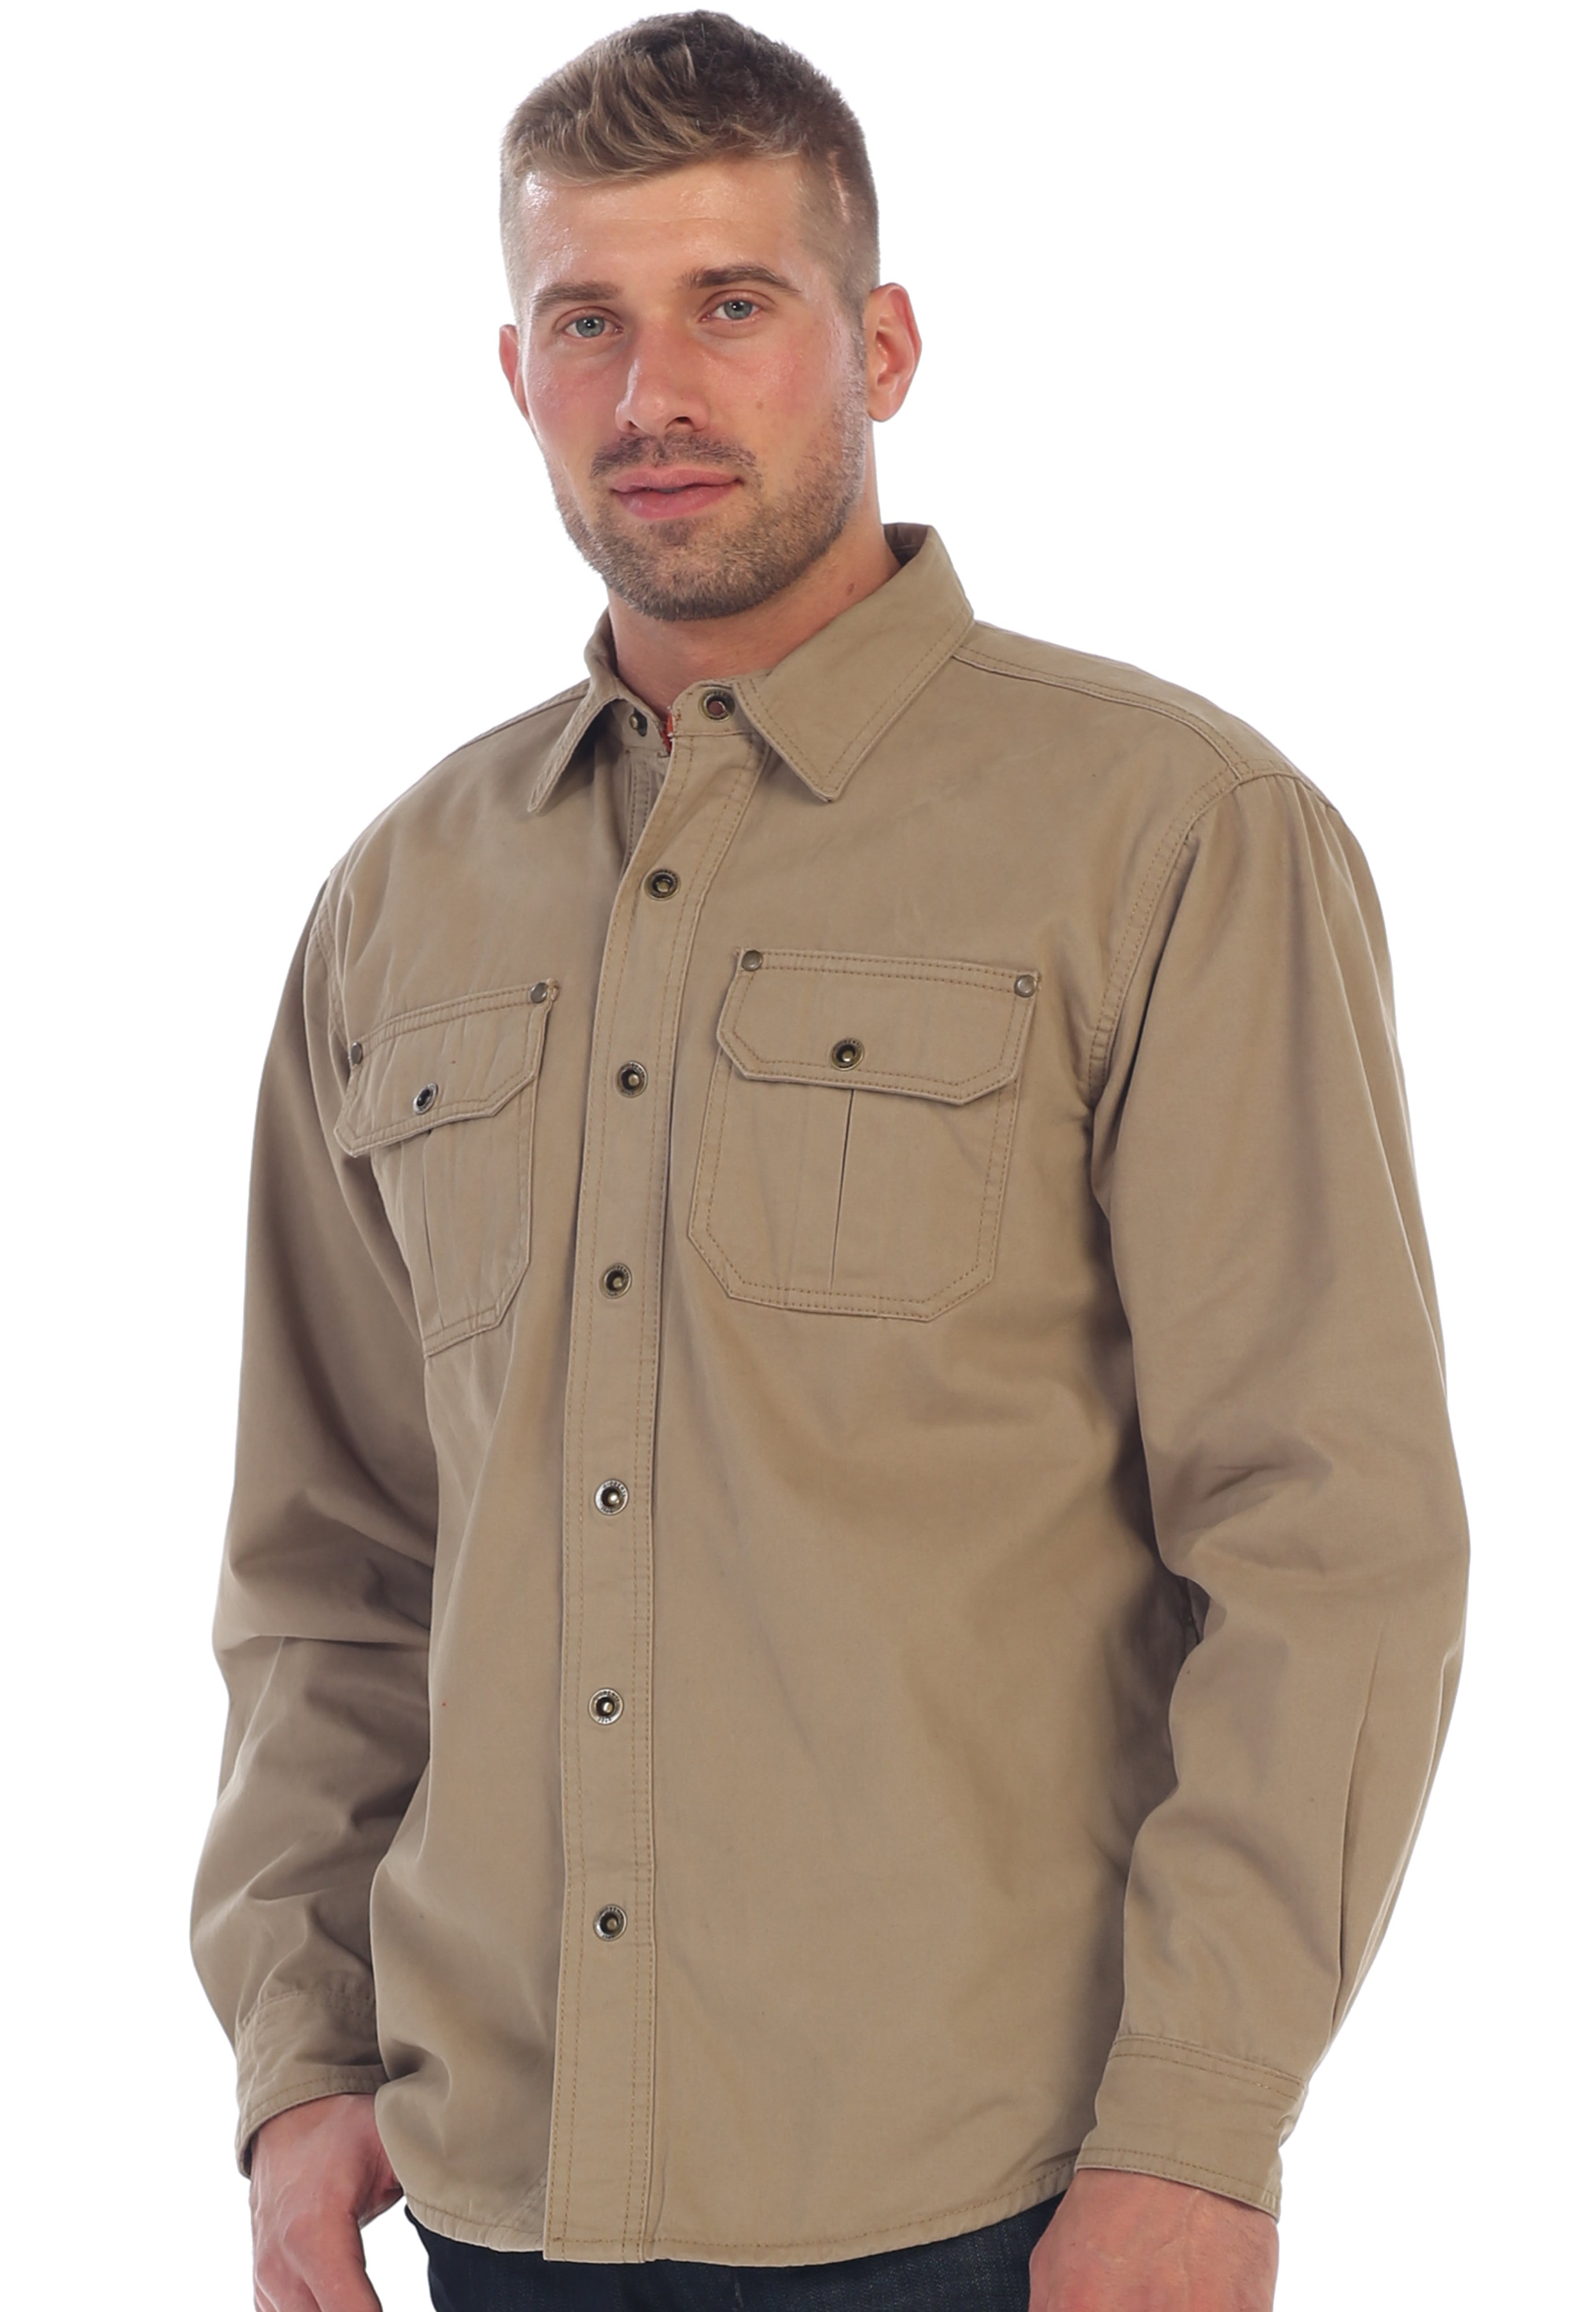 title:Gioberti Men's Khaki Cotton Brushed and Soft Twill Shirt Jacket with Flannel Lining;color:Khaki